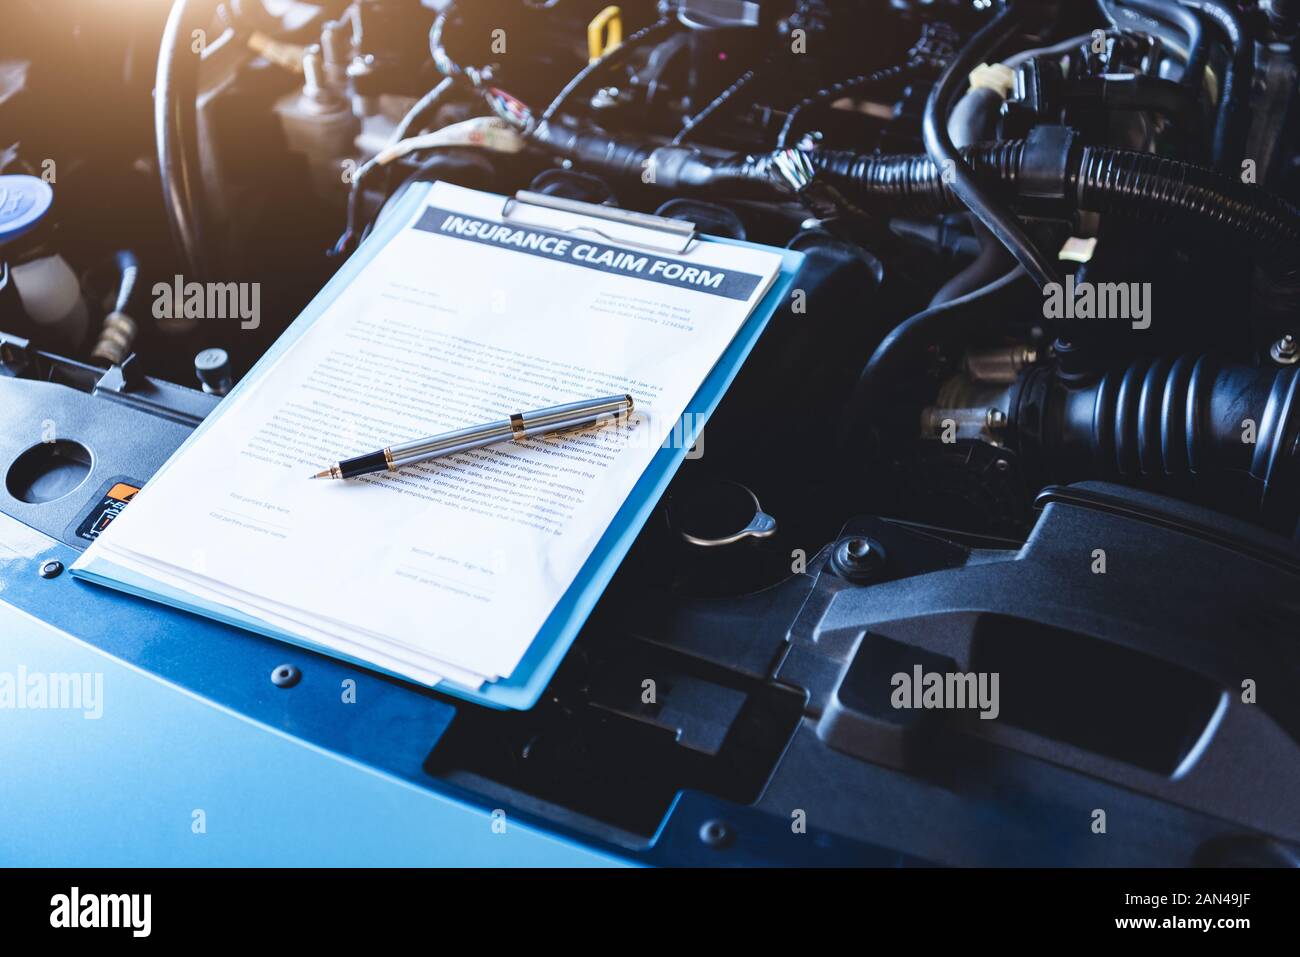 Clipboard On Car With Car Insurance Claim Form For Customer Maintenance Vehicle Checklist In Auto Repair Shop Garage Engine Repair Service Concept B Stock Photo Alamy